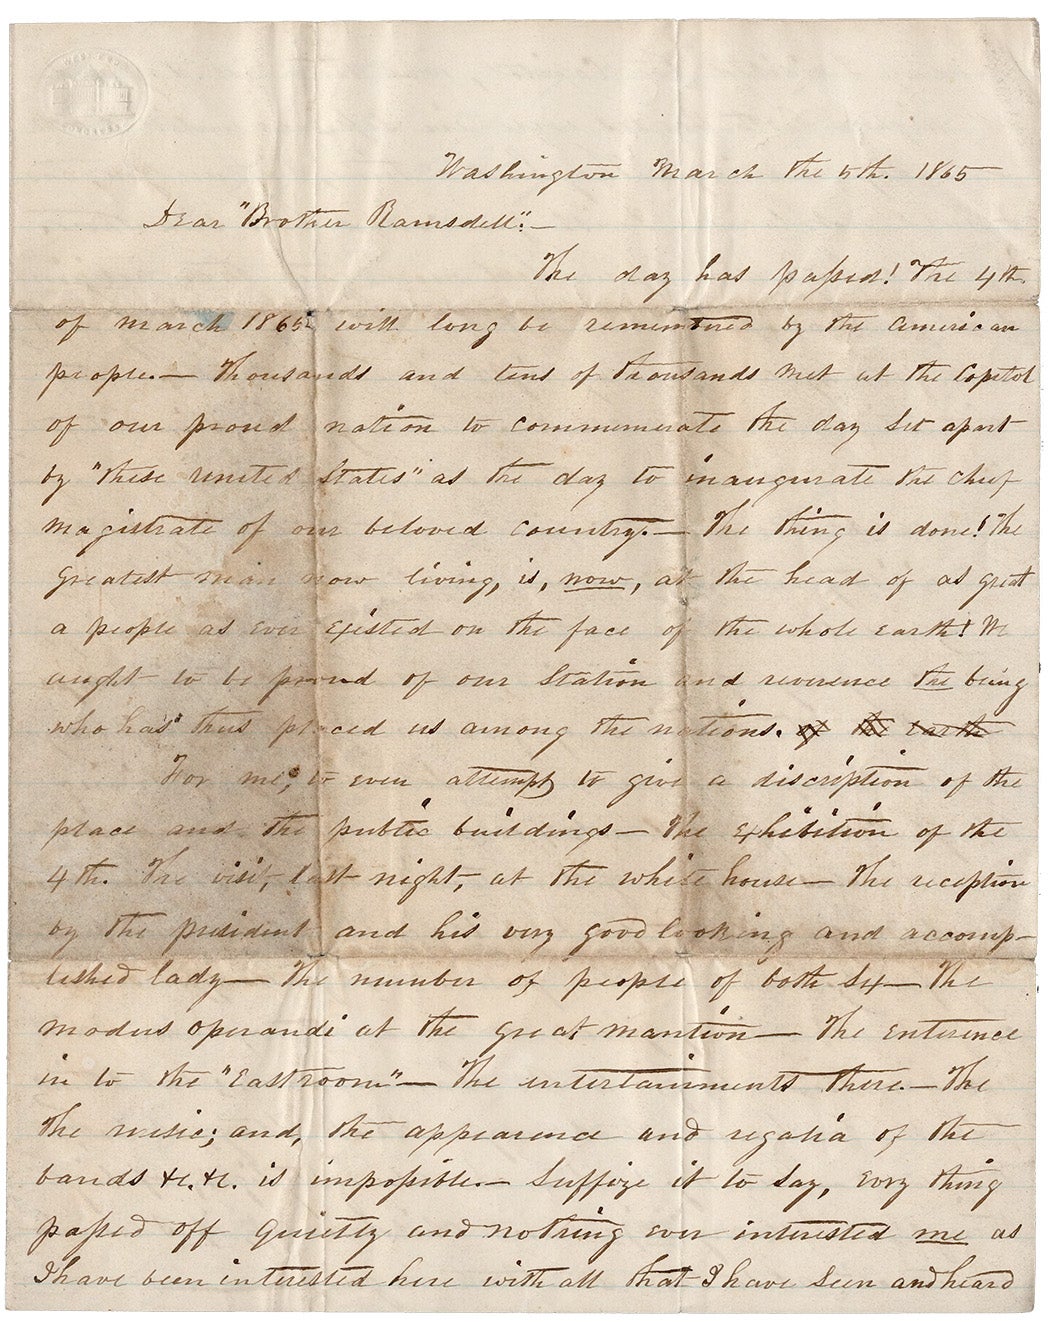 Letter describing Abraham Lincoln's second Inaugural Address, the celebrations, and his impressions of Washington, D.C., Baltimore, Pittsburgh, and Harrisburgh. The letter is accompanied by an envelope addressed to Mr. Claude Hamilton from the Lincoln National Life Insurance Co. with images of Lincoln and his birthplace.